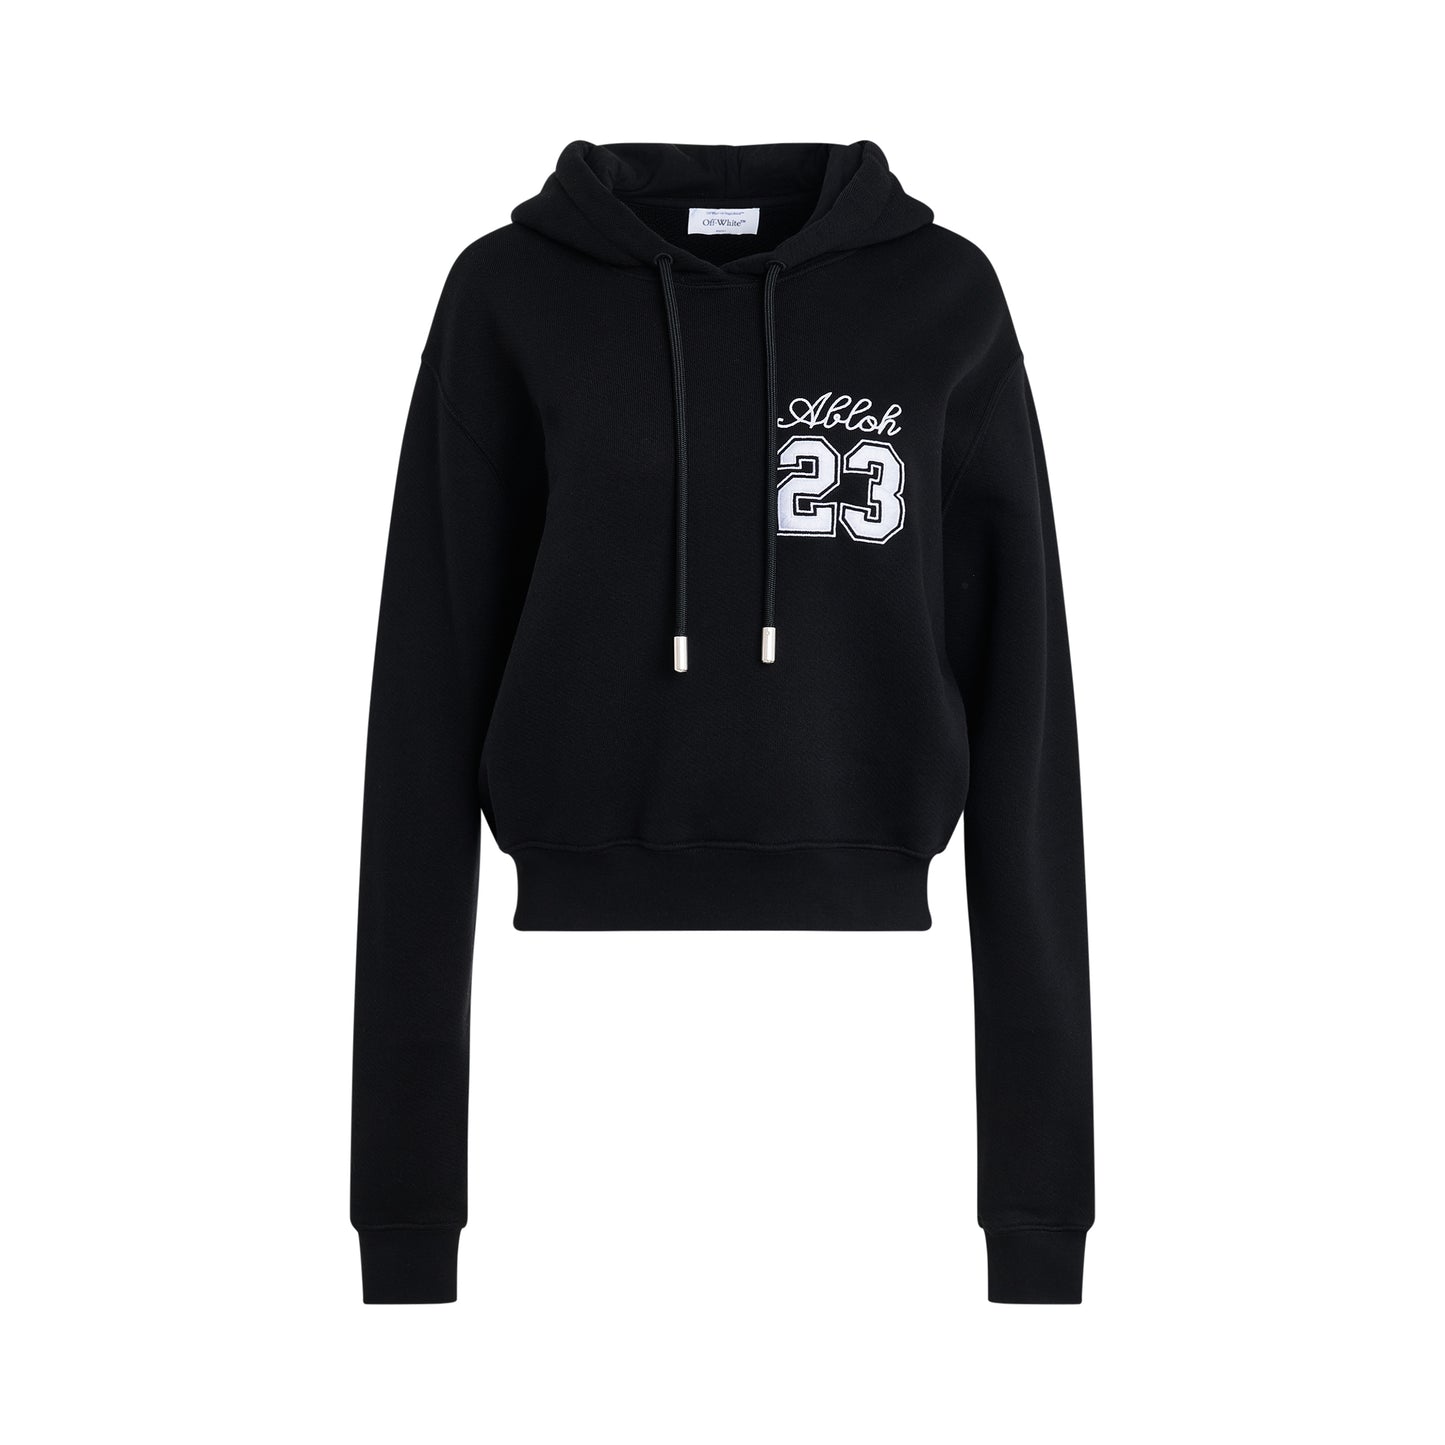 OW 23 Embroidered Cropped Hoodie in Black/White